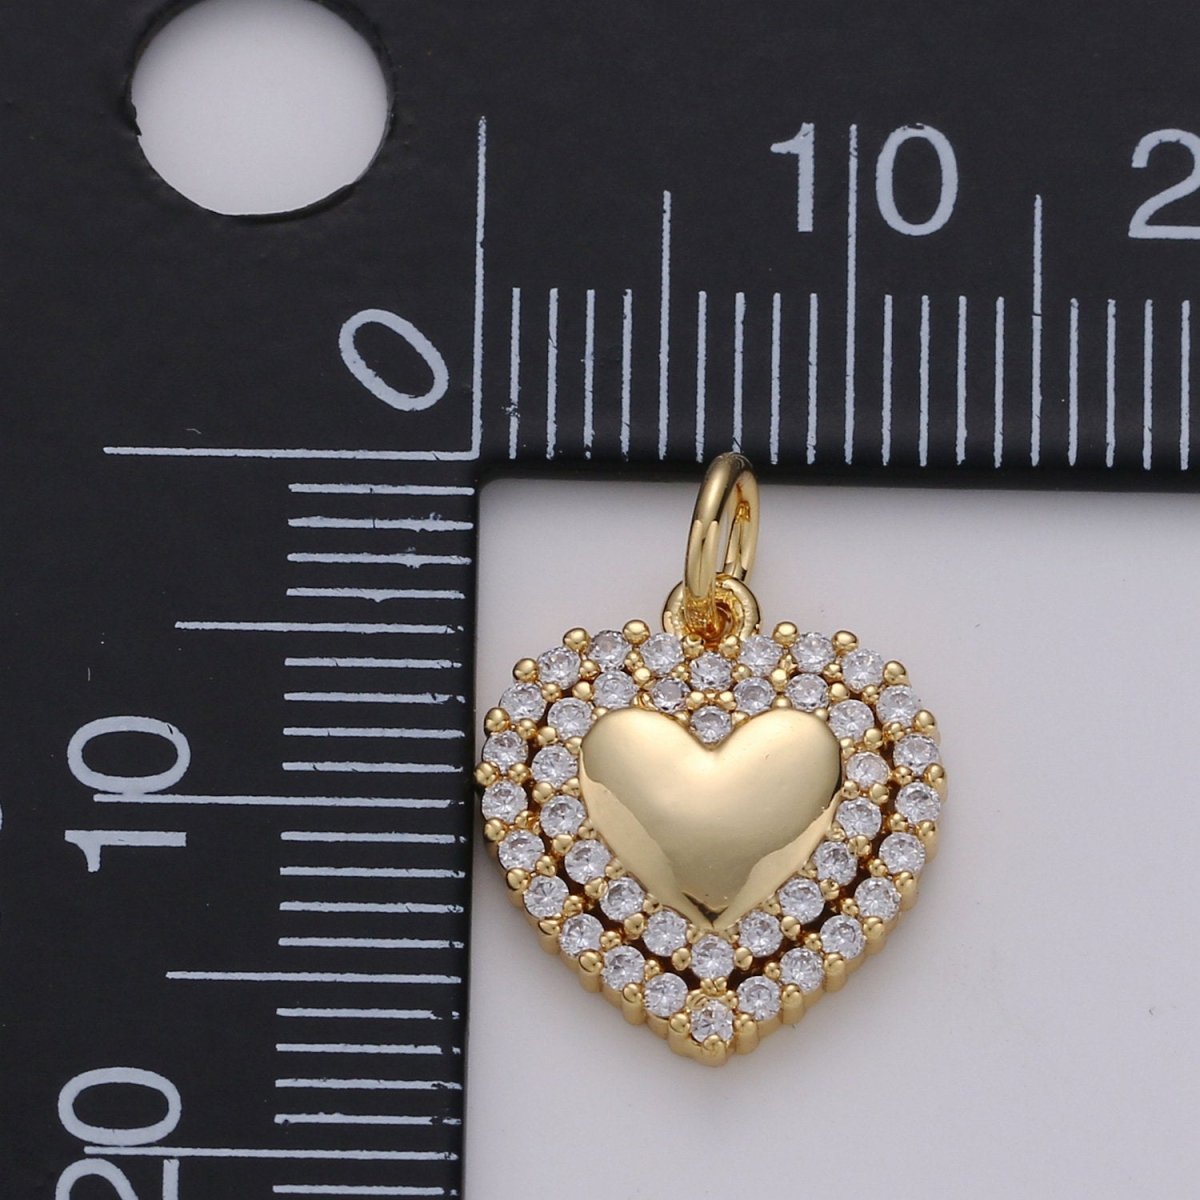 1pc 24k Gold Filled Micro Pave CZ Heart Pendant Charm, Love Micro Pave CZ Pendant Charm, For DIY Jewelry D-433 - DLUXCA